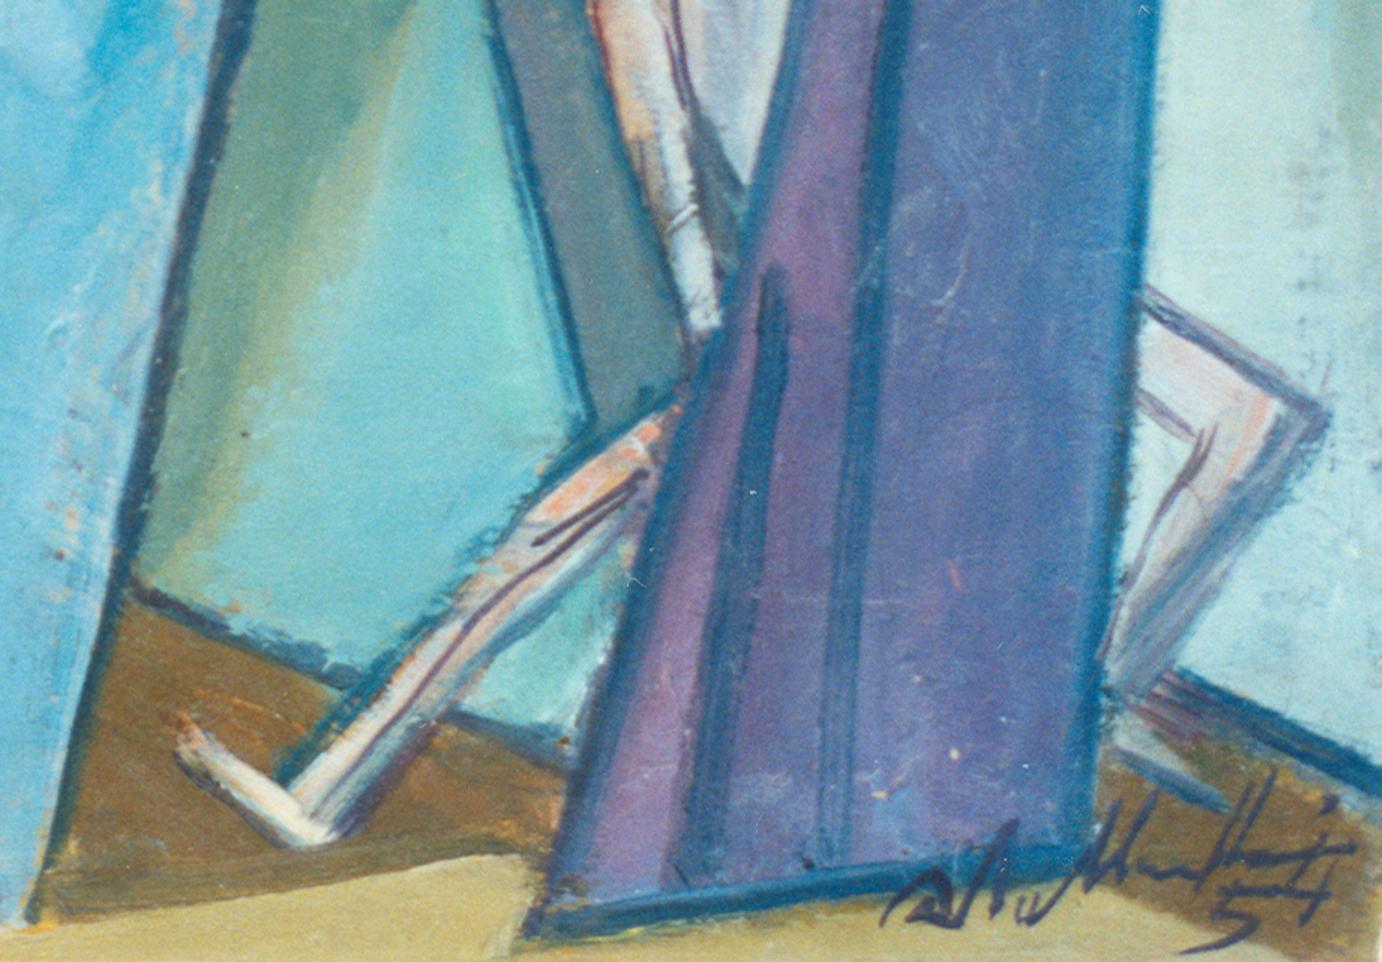 Oil on cardboard, 1954 by Walter Wellenstein ( Dortmund 1898-1970 Berlin ). Signed and dated lower right: Wellenstein 54. Framed. 
Height: 13.78 in ( 35 cm ), Width: 18.5 in ( 47 cm ). Provenance: Son of the artist

